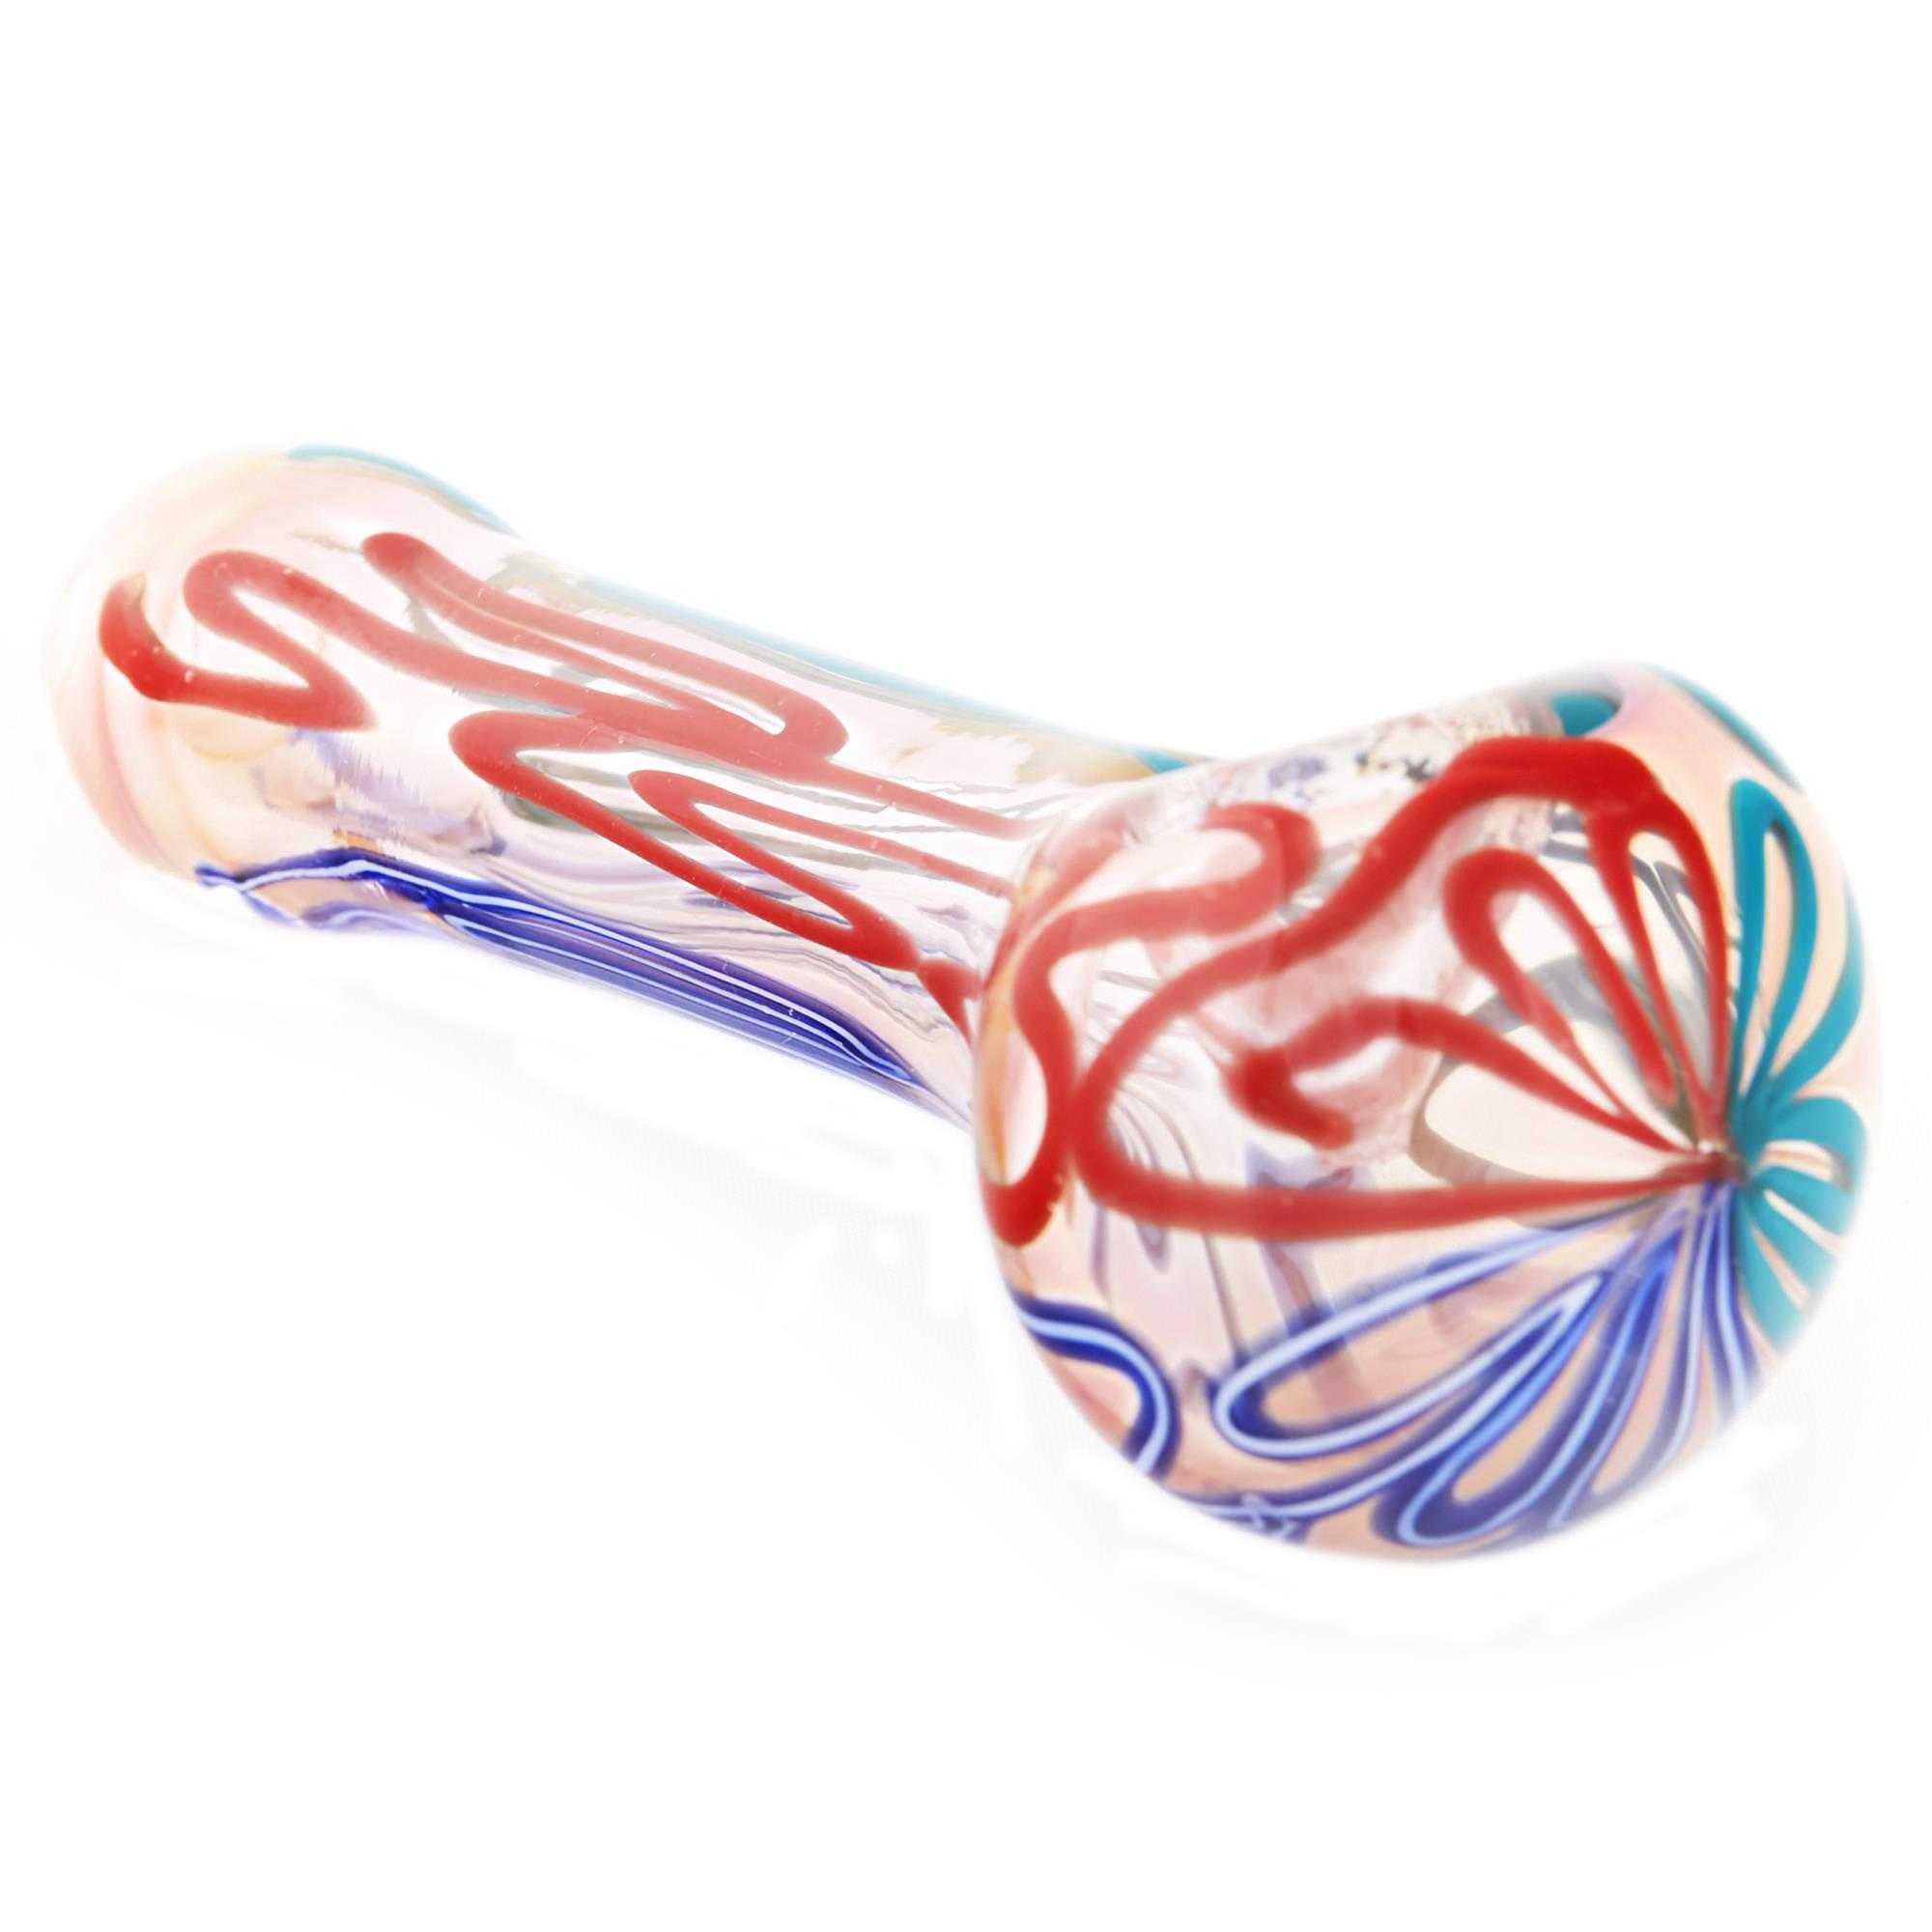 CANNABE YOURS SPOON PIPE